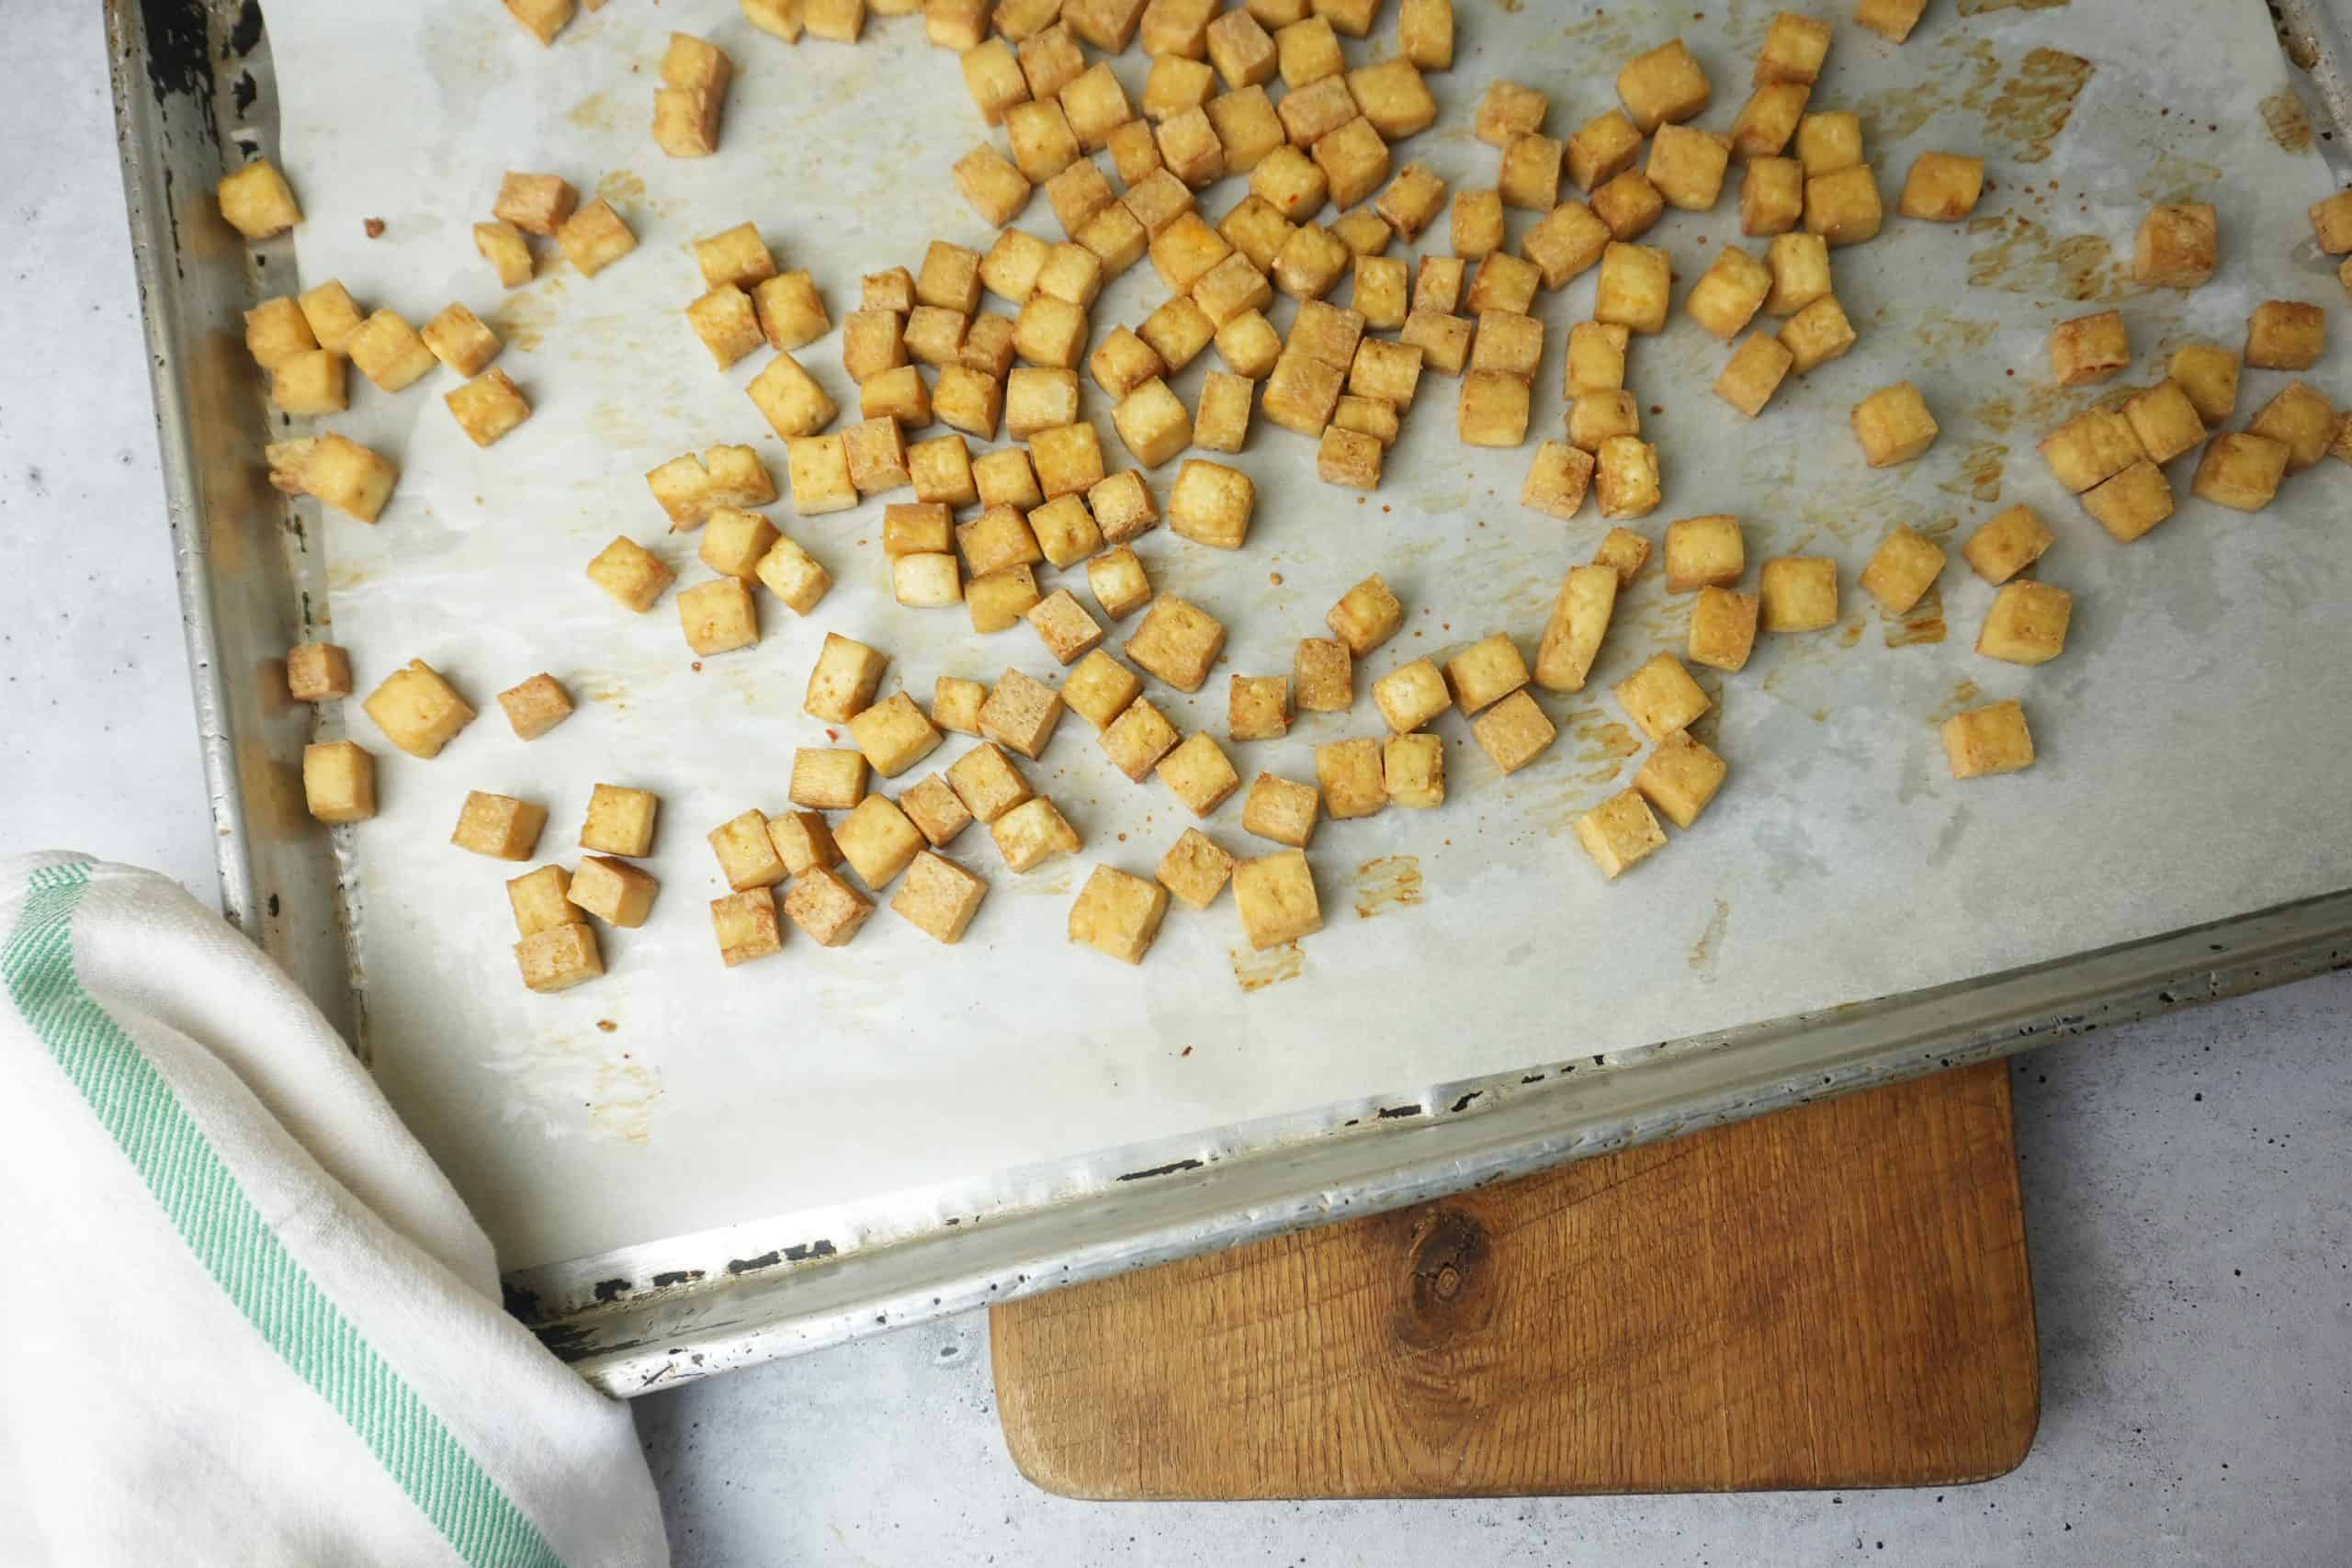 Golden brown, crispy roasted tofu cubes on a parchment paper lined baking pan.